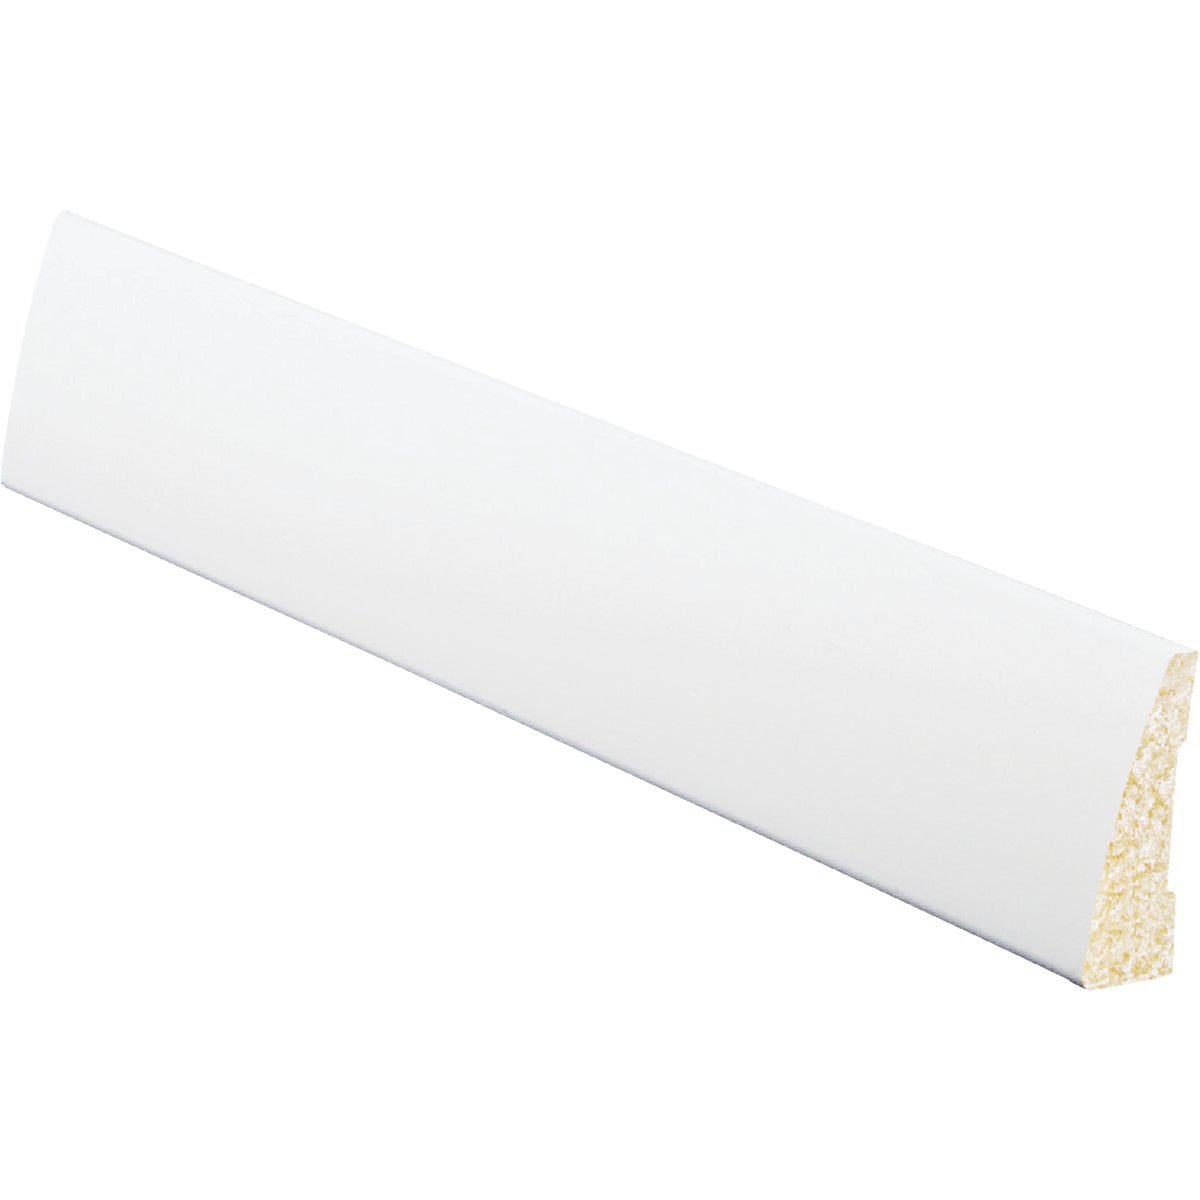 Inteplast Building Products 5/8 In. W. x 2-1/4 In. H. x 7 Ft. L. Crystal White Polystyrene Ranch Casing